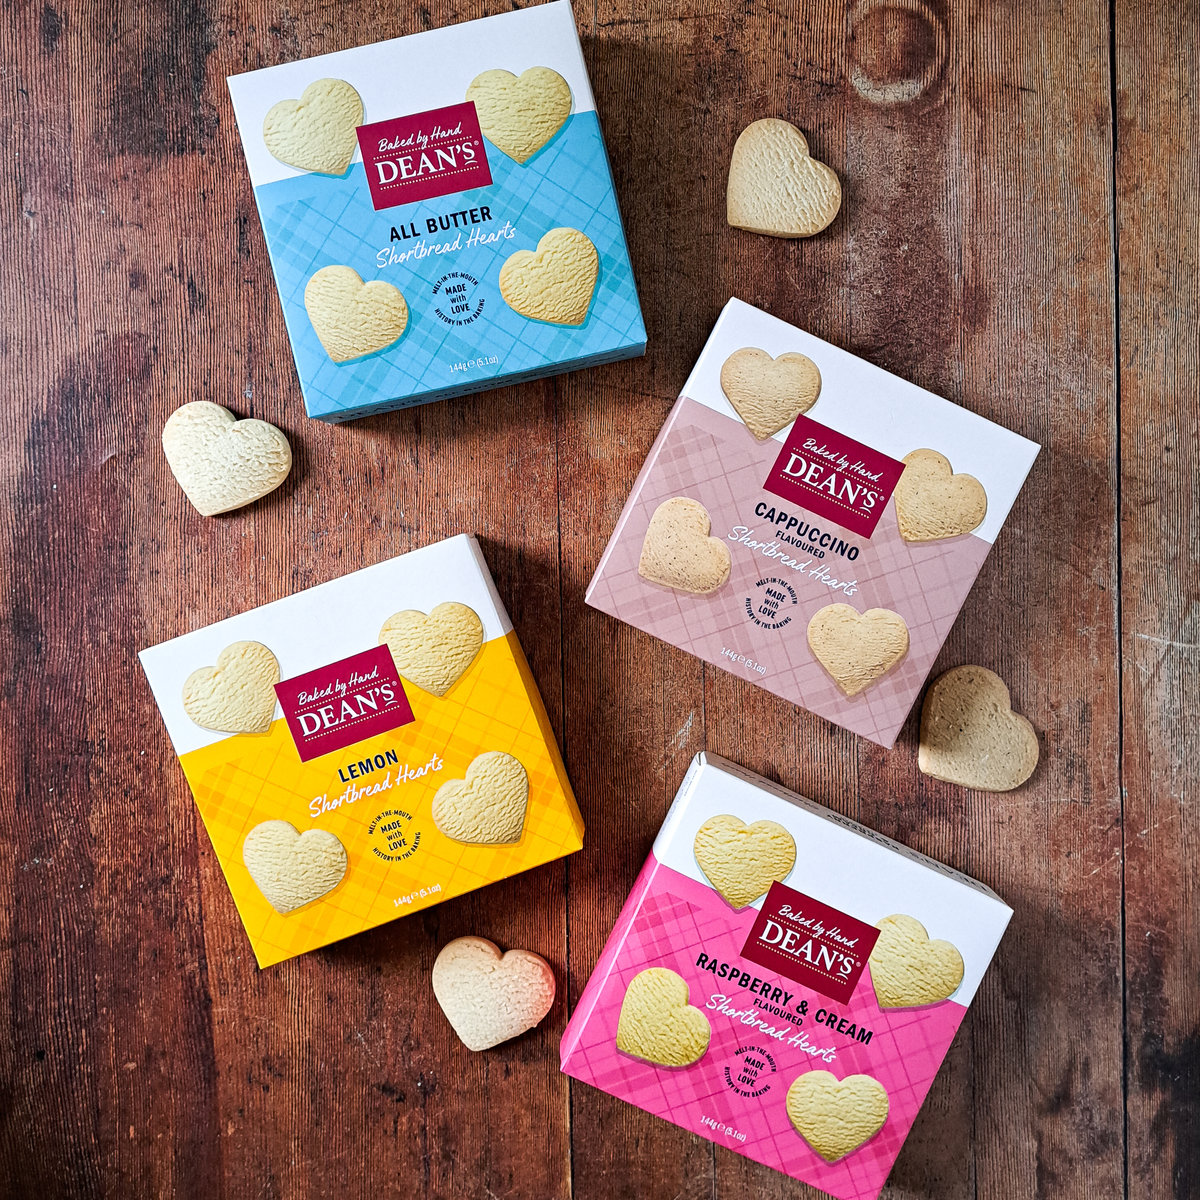 Buy the All Butter Shortbread Hearts 144g online at Dean's